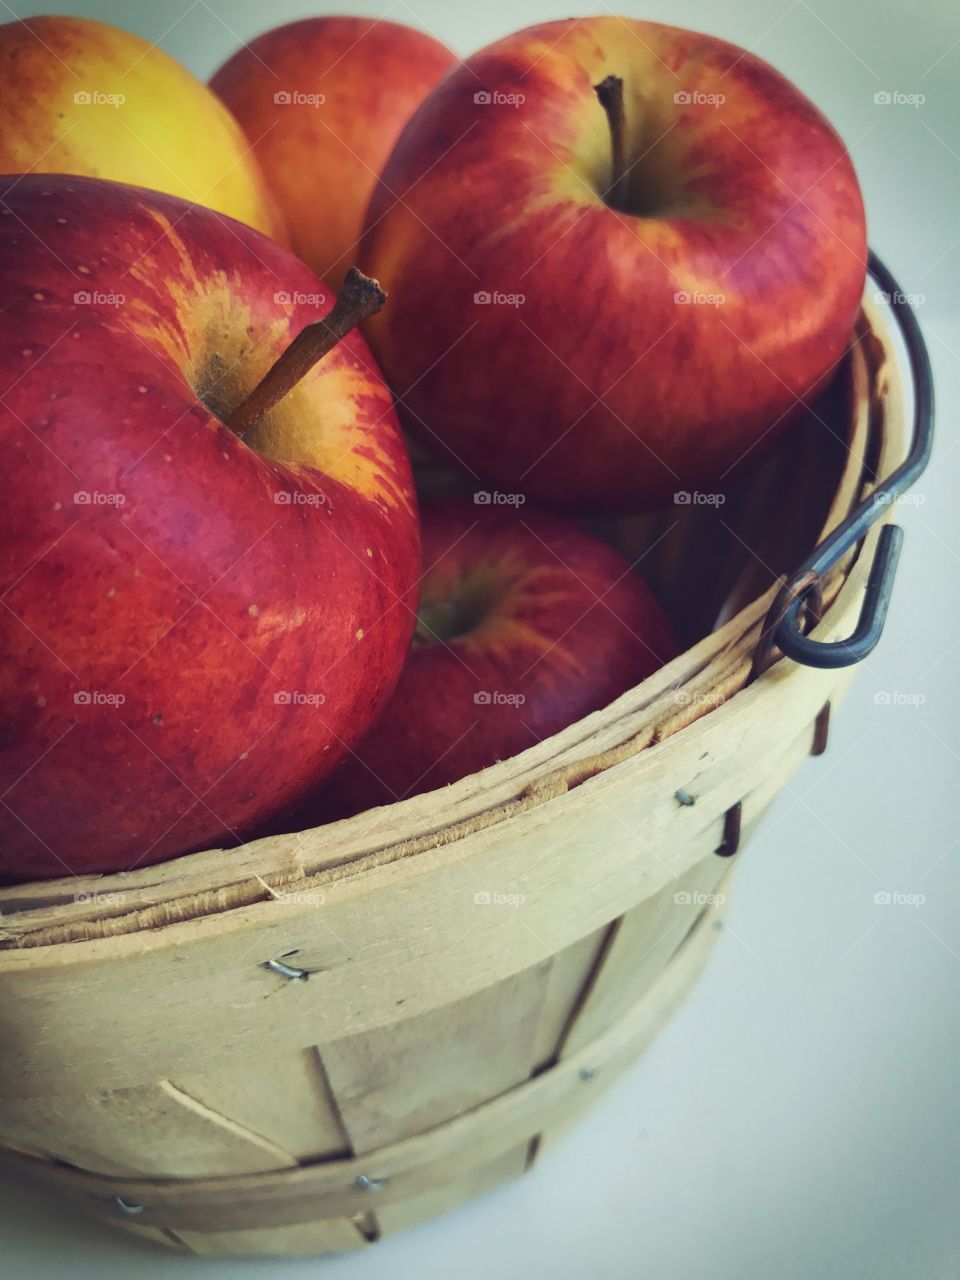 Apples in a basket 